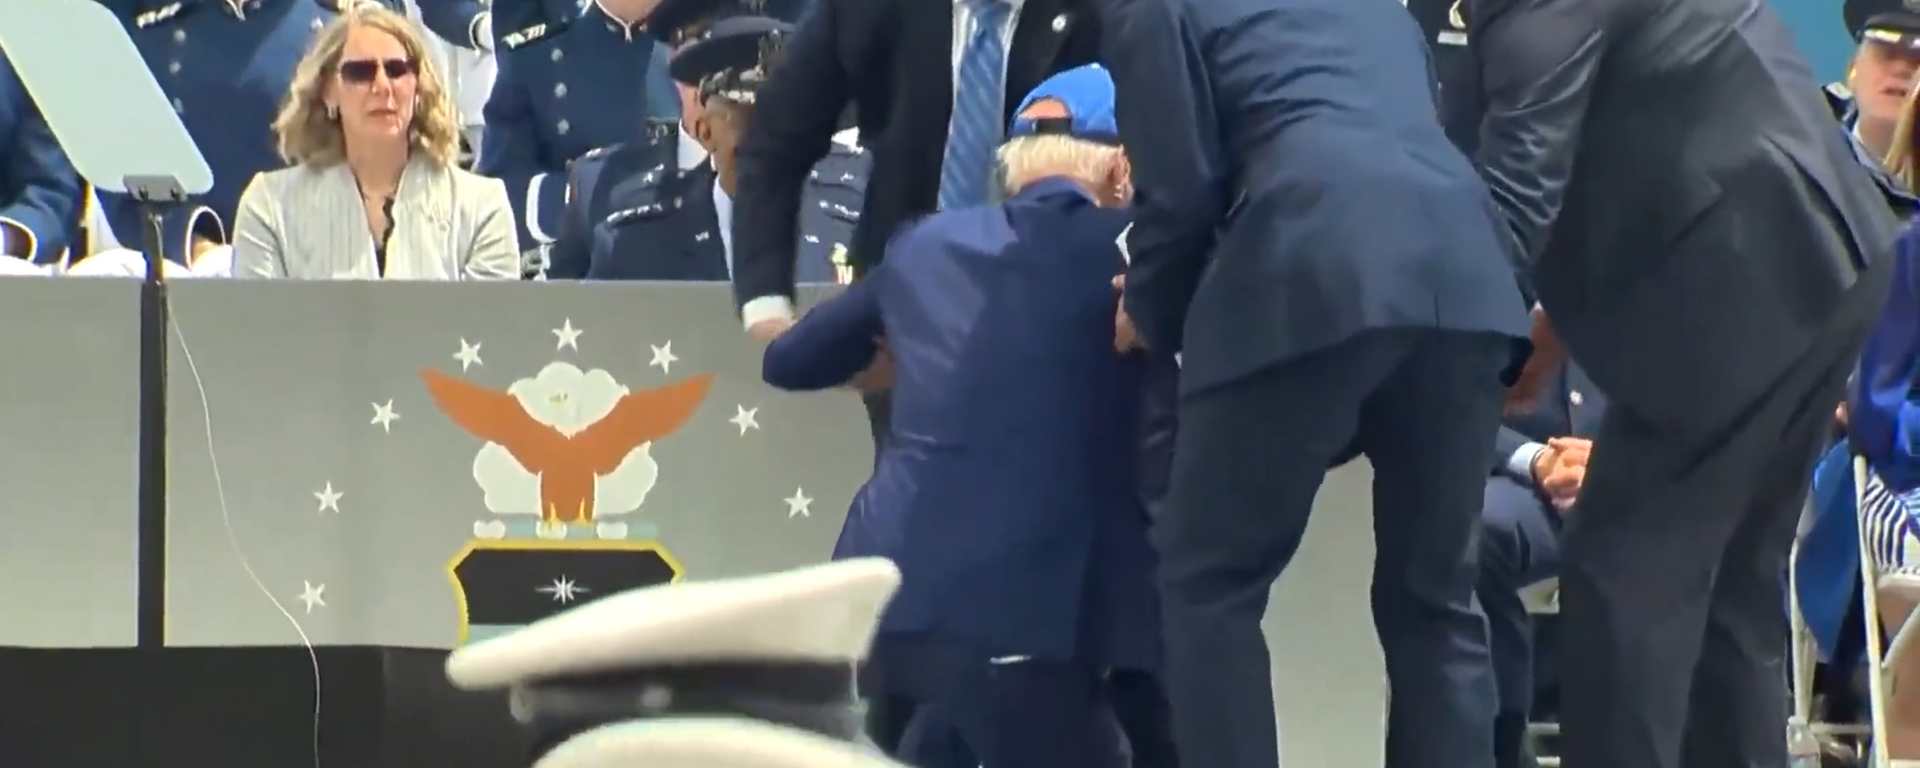 Image captures the moment in which US President Joe Biden fall on stage during the commencement ceremony at the US Air Force Academy in Colorado. - Sputnik International, 1920, 01.06.2023